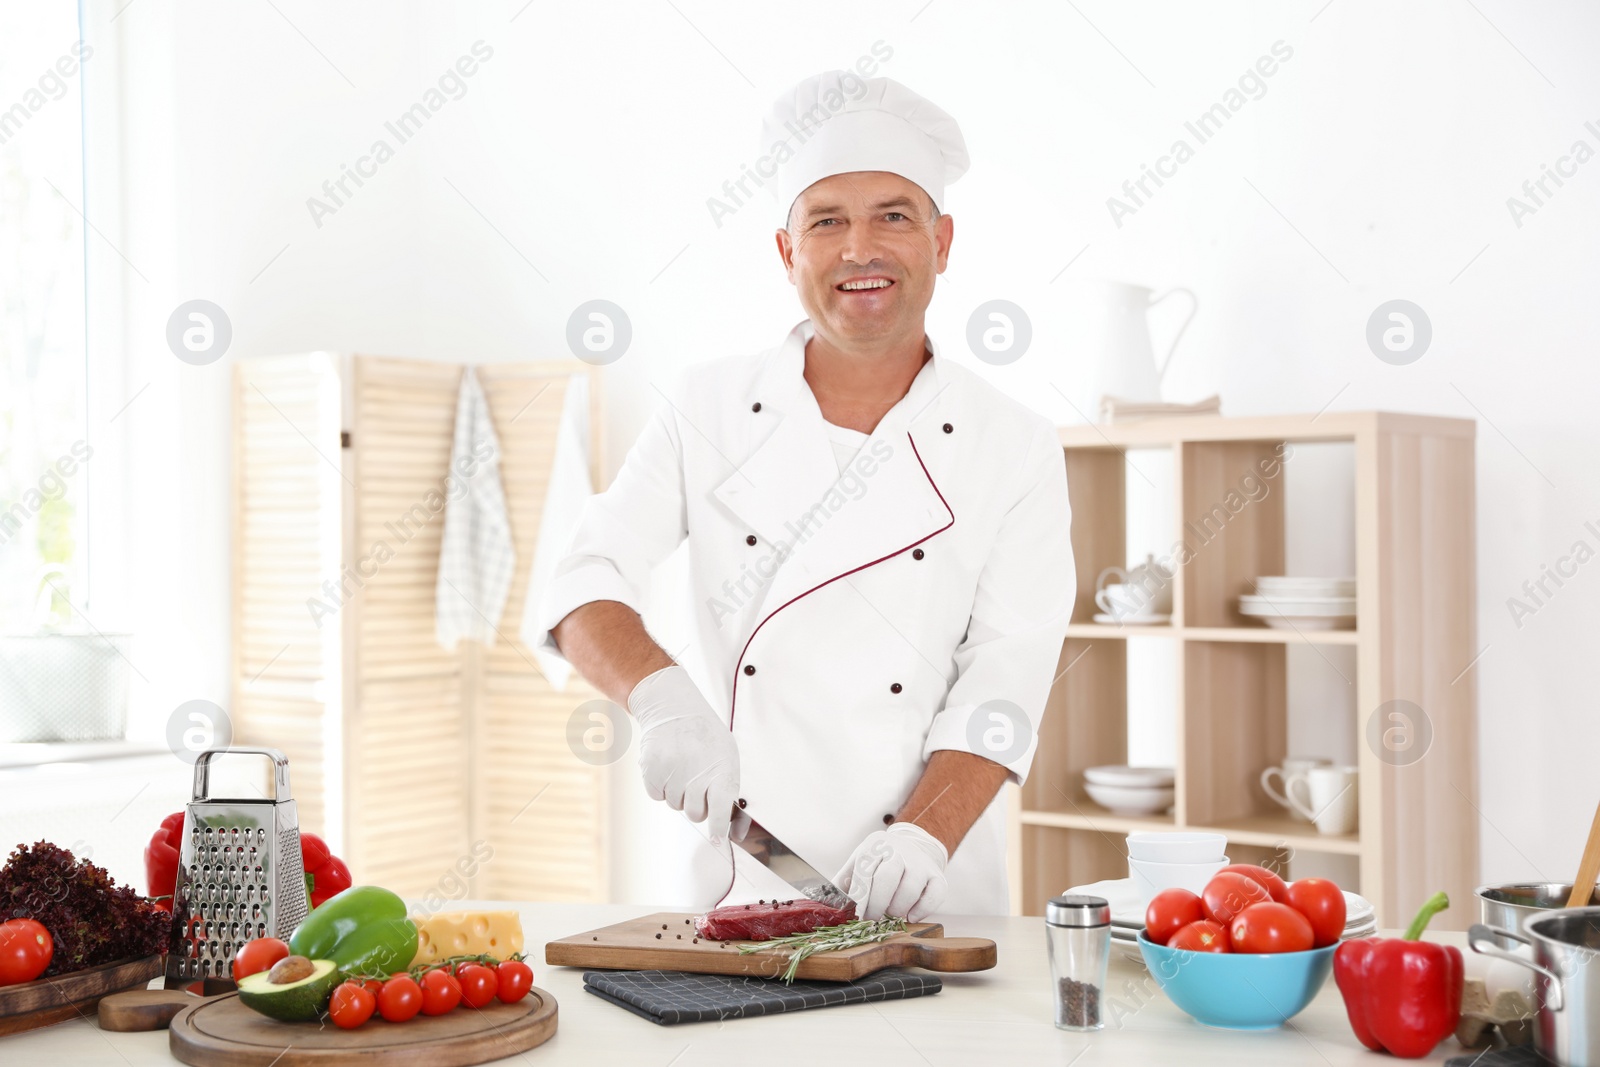 Photo of Professional chef cutting meat on table in kitchen